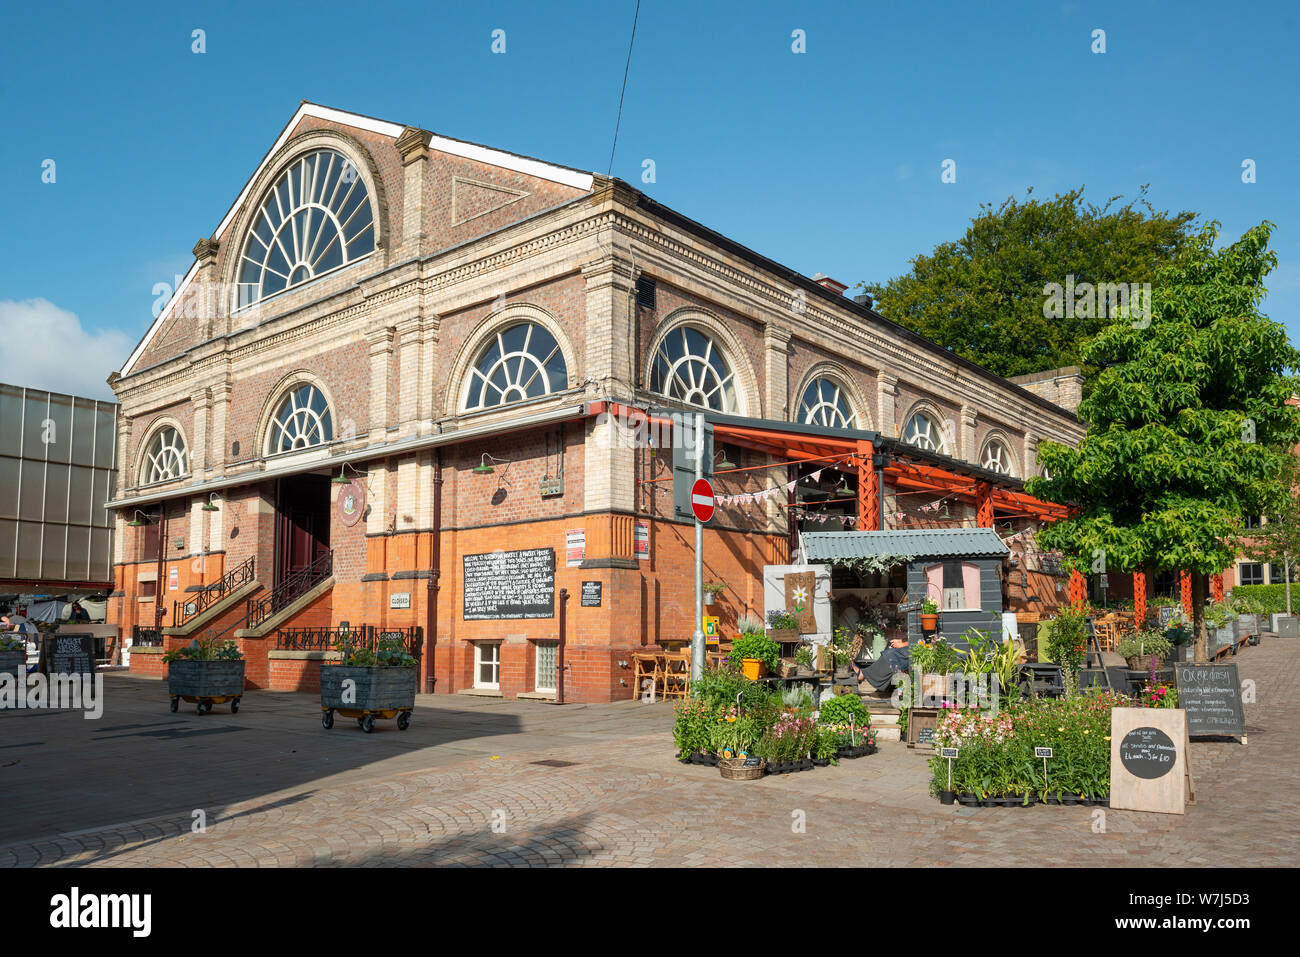 An external view of Altrincham Market House on a sunny day. Stock Photo